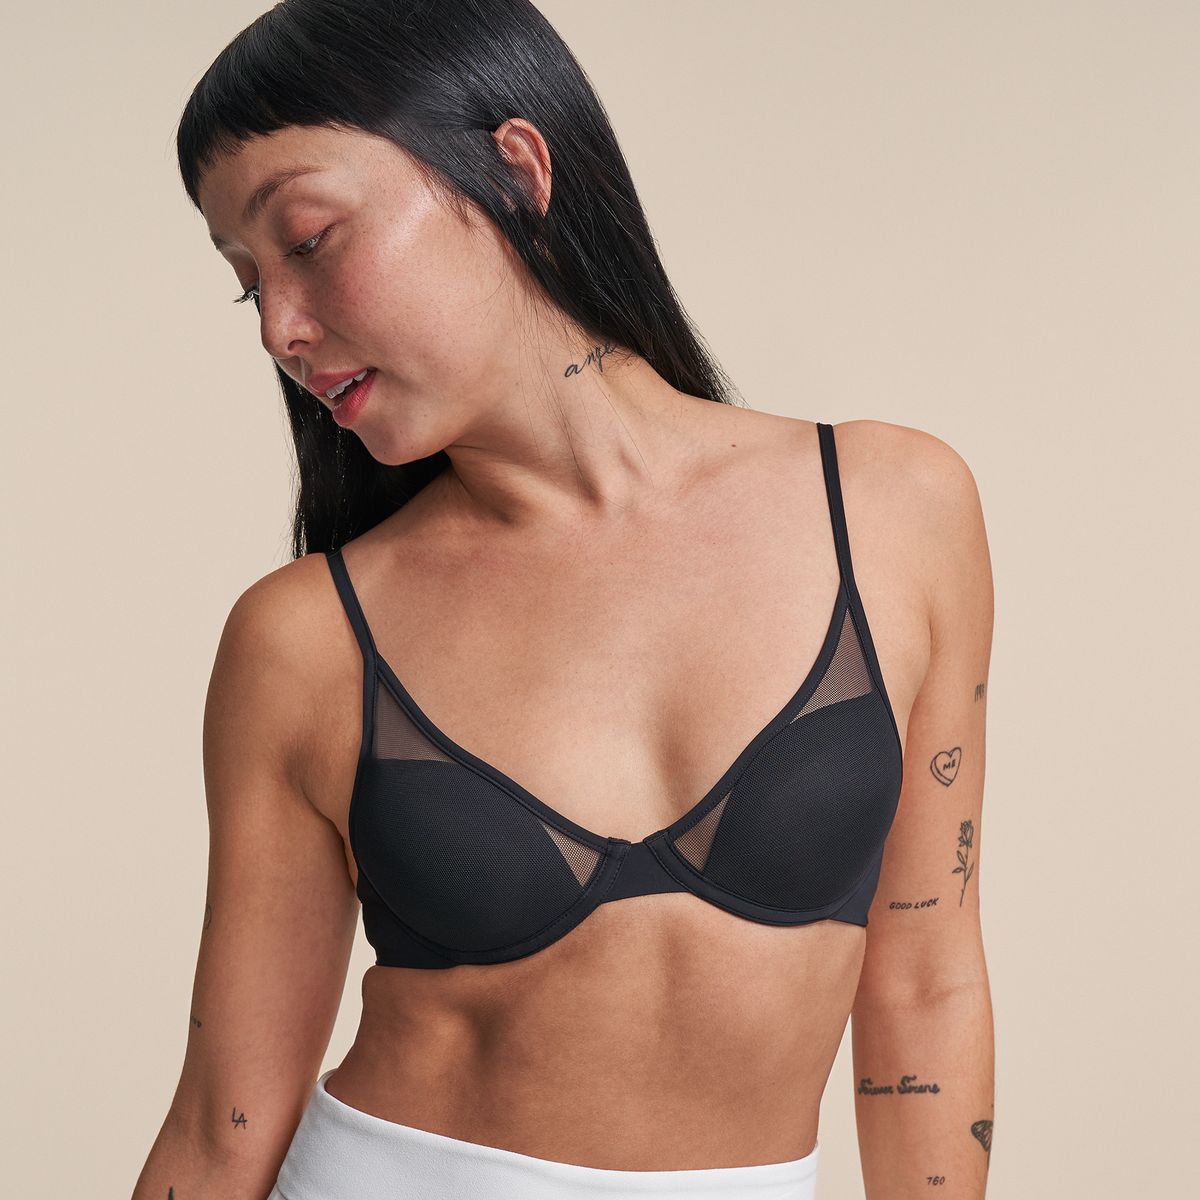 Pepper Bra Review 2023: Pepper Makes the Best Bra for Small Boobs